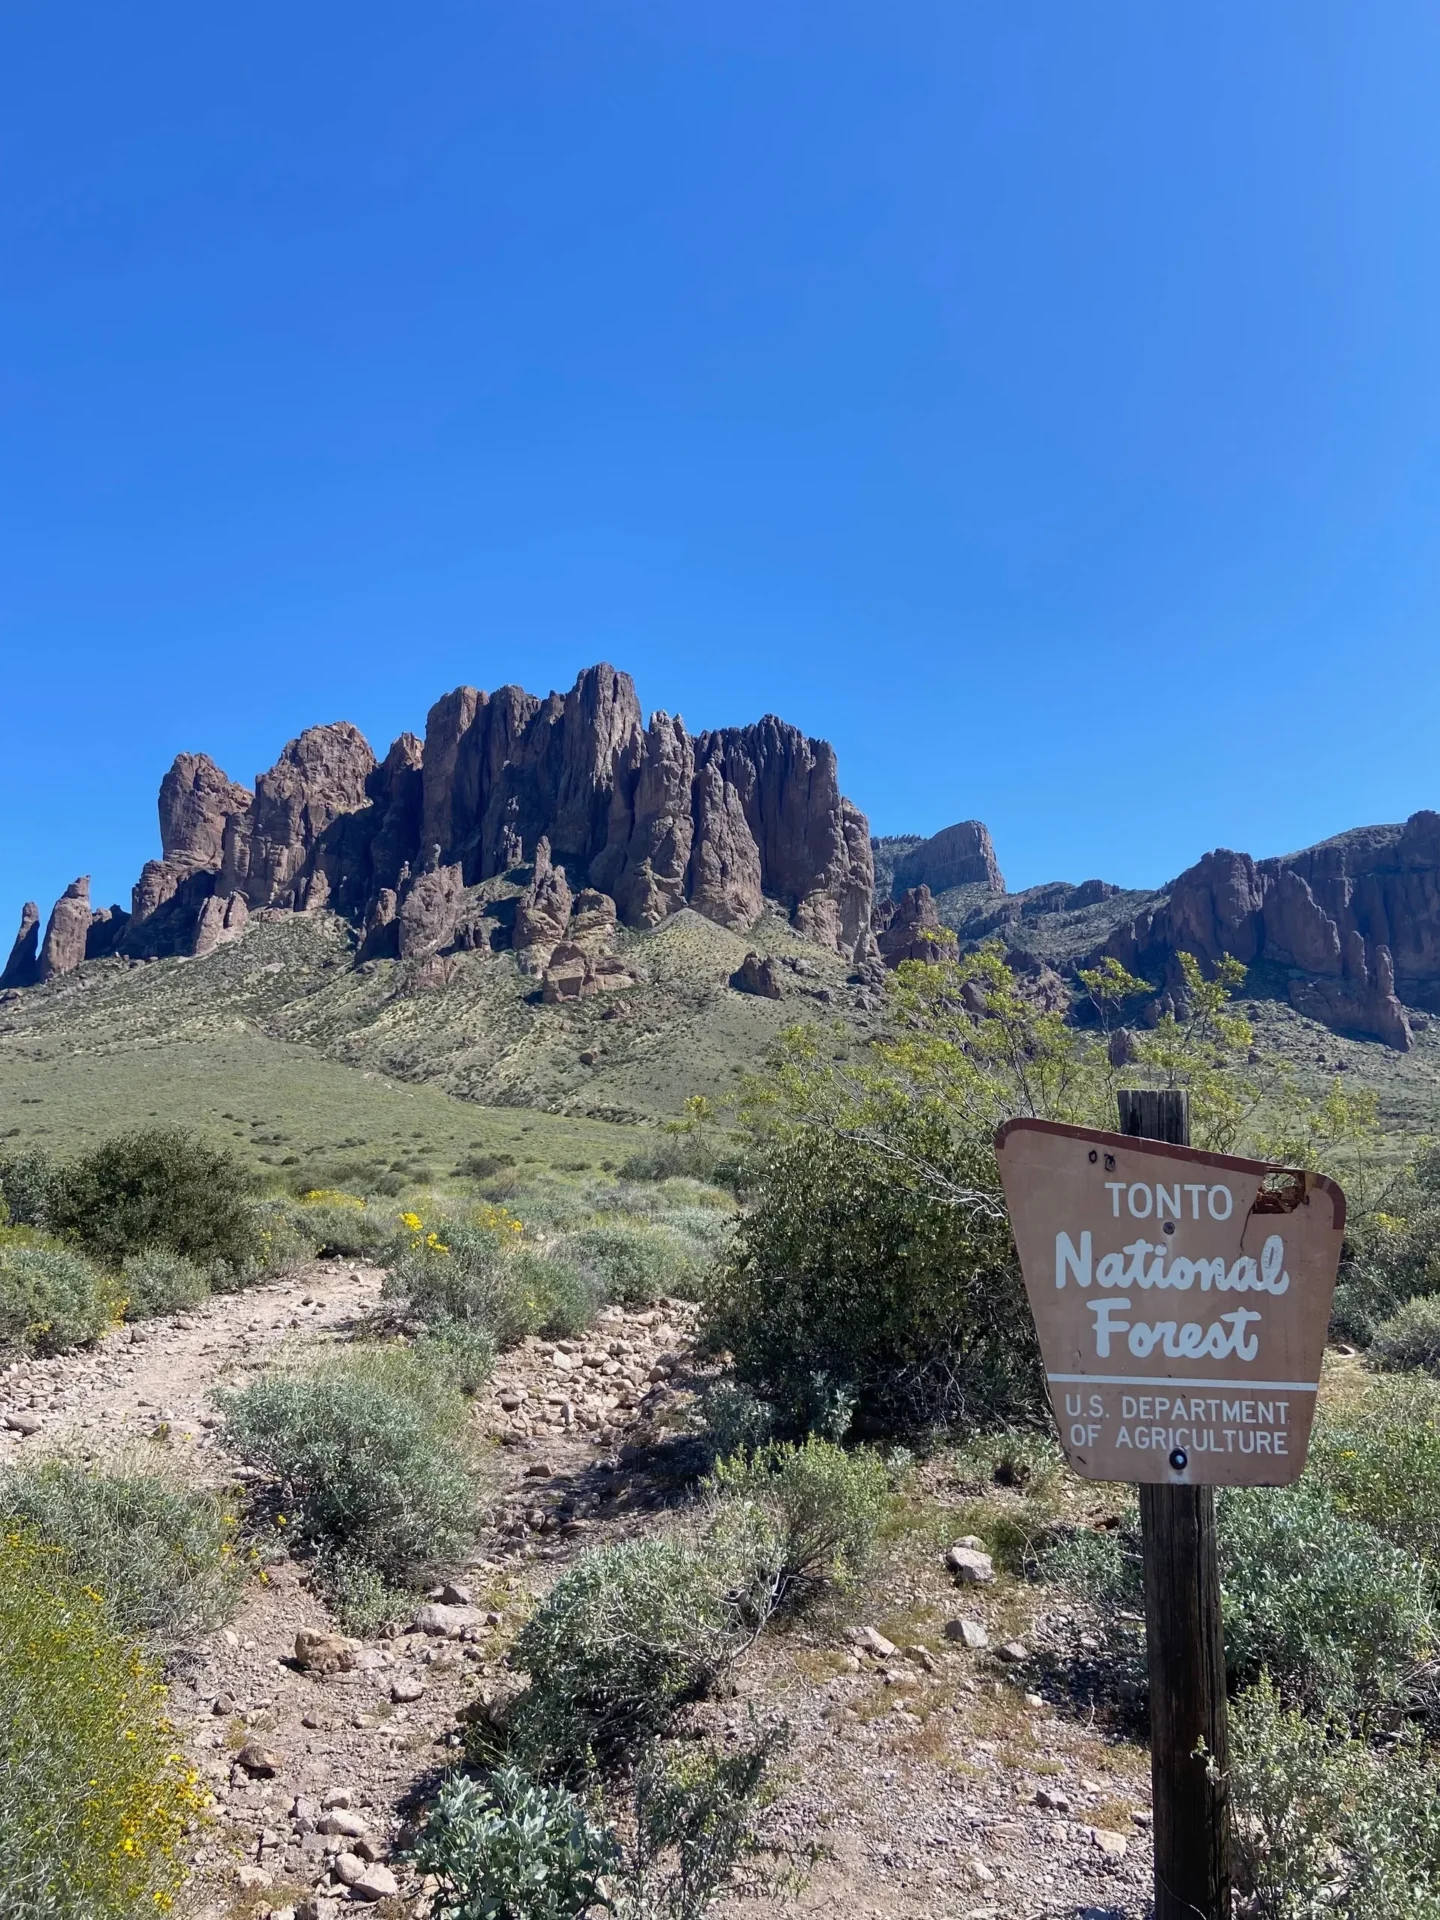 Lost Dutchmain Trailhead at Superstition Mountain.